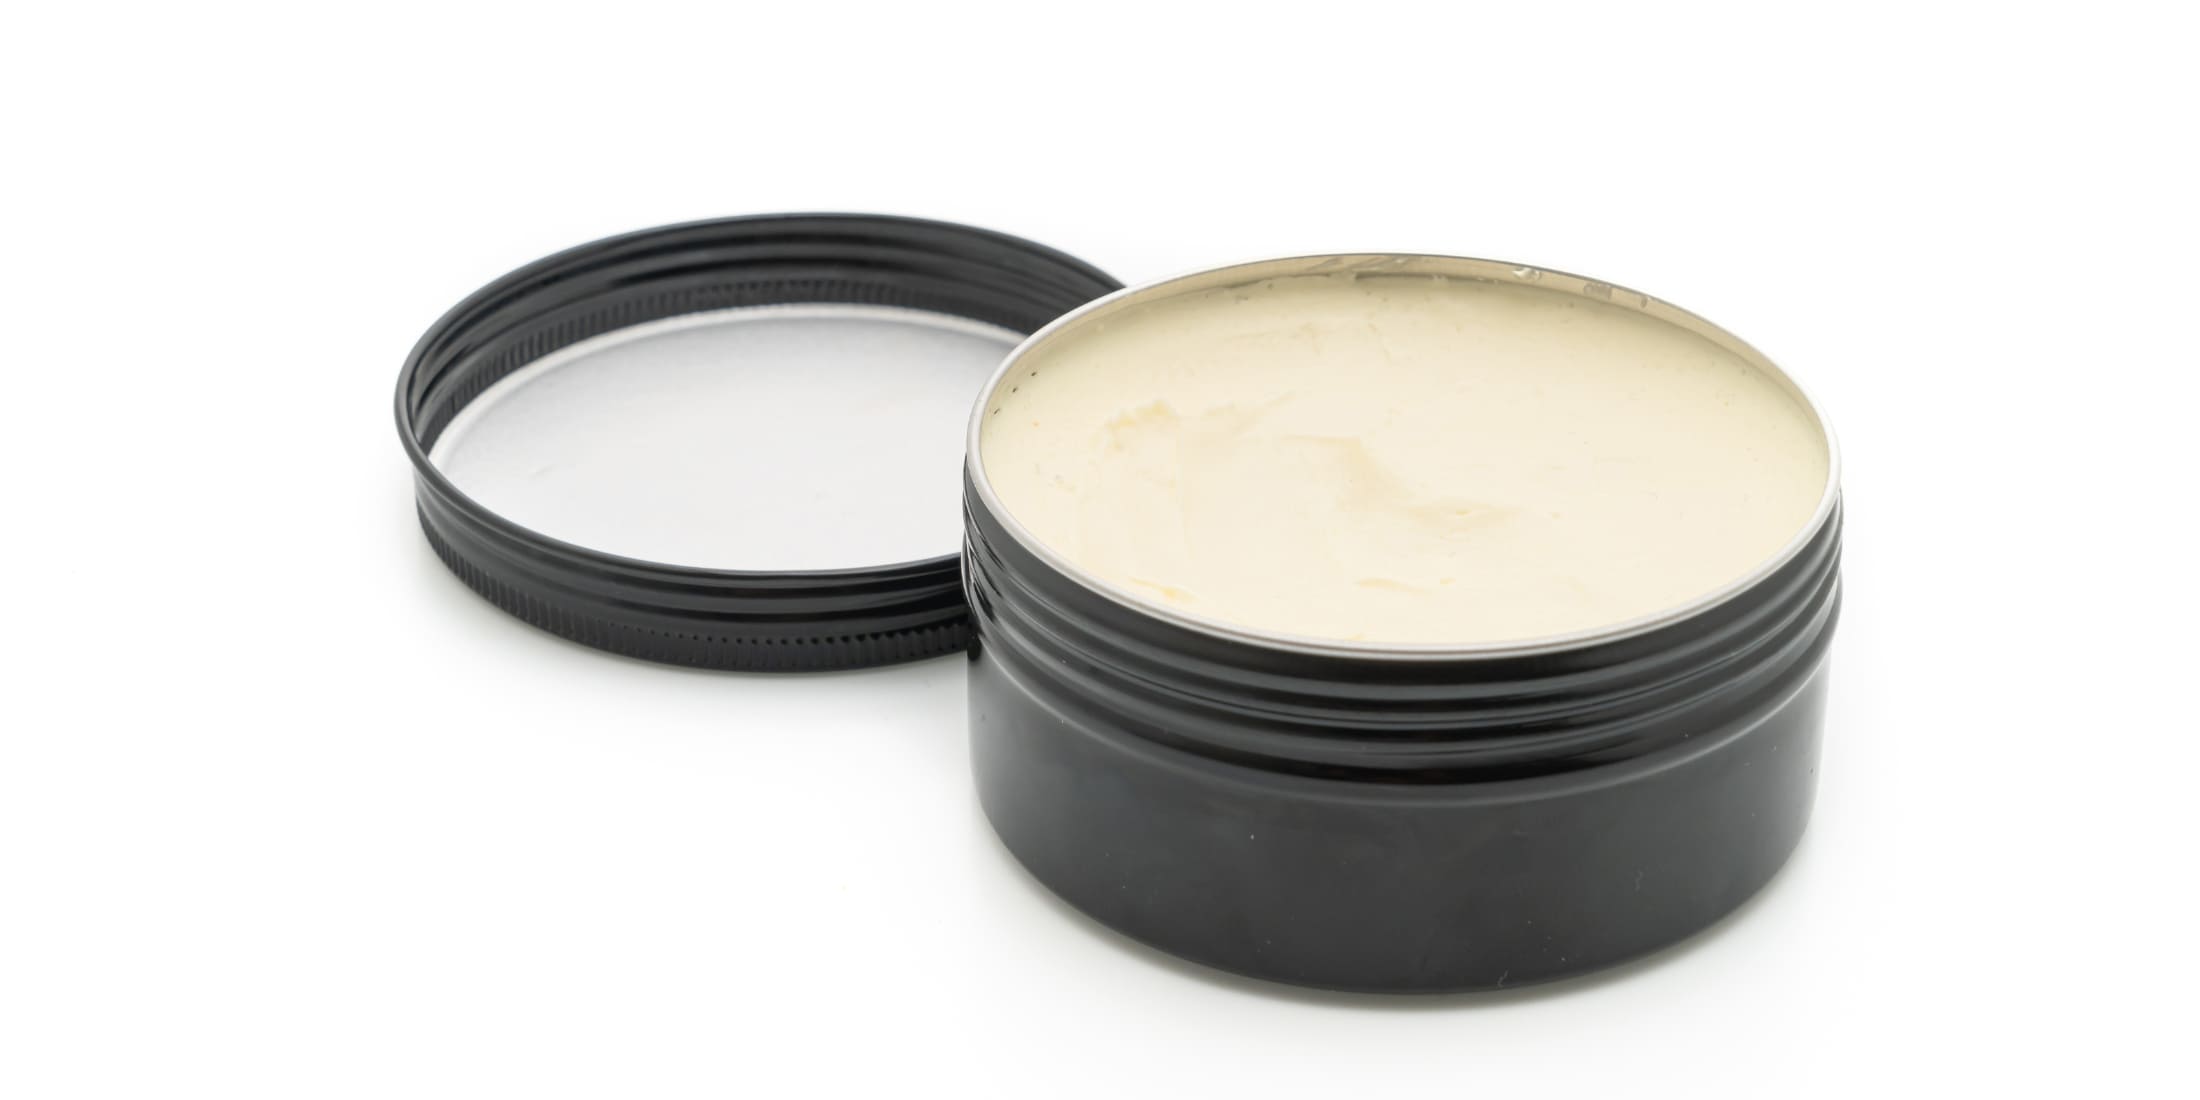 Tin of hair pomade for men - ideal for achieving sleek, polished hairstyles with a shiny finish. Explore the benefits of hair pomade in the Clay vs Pomade guide